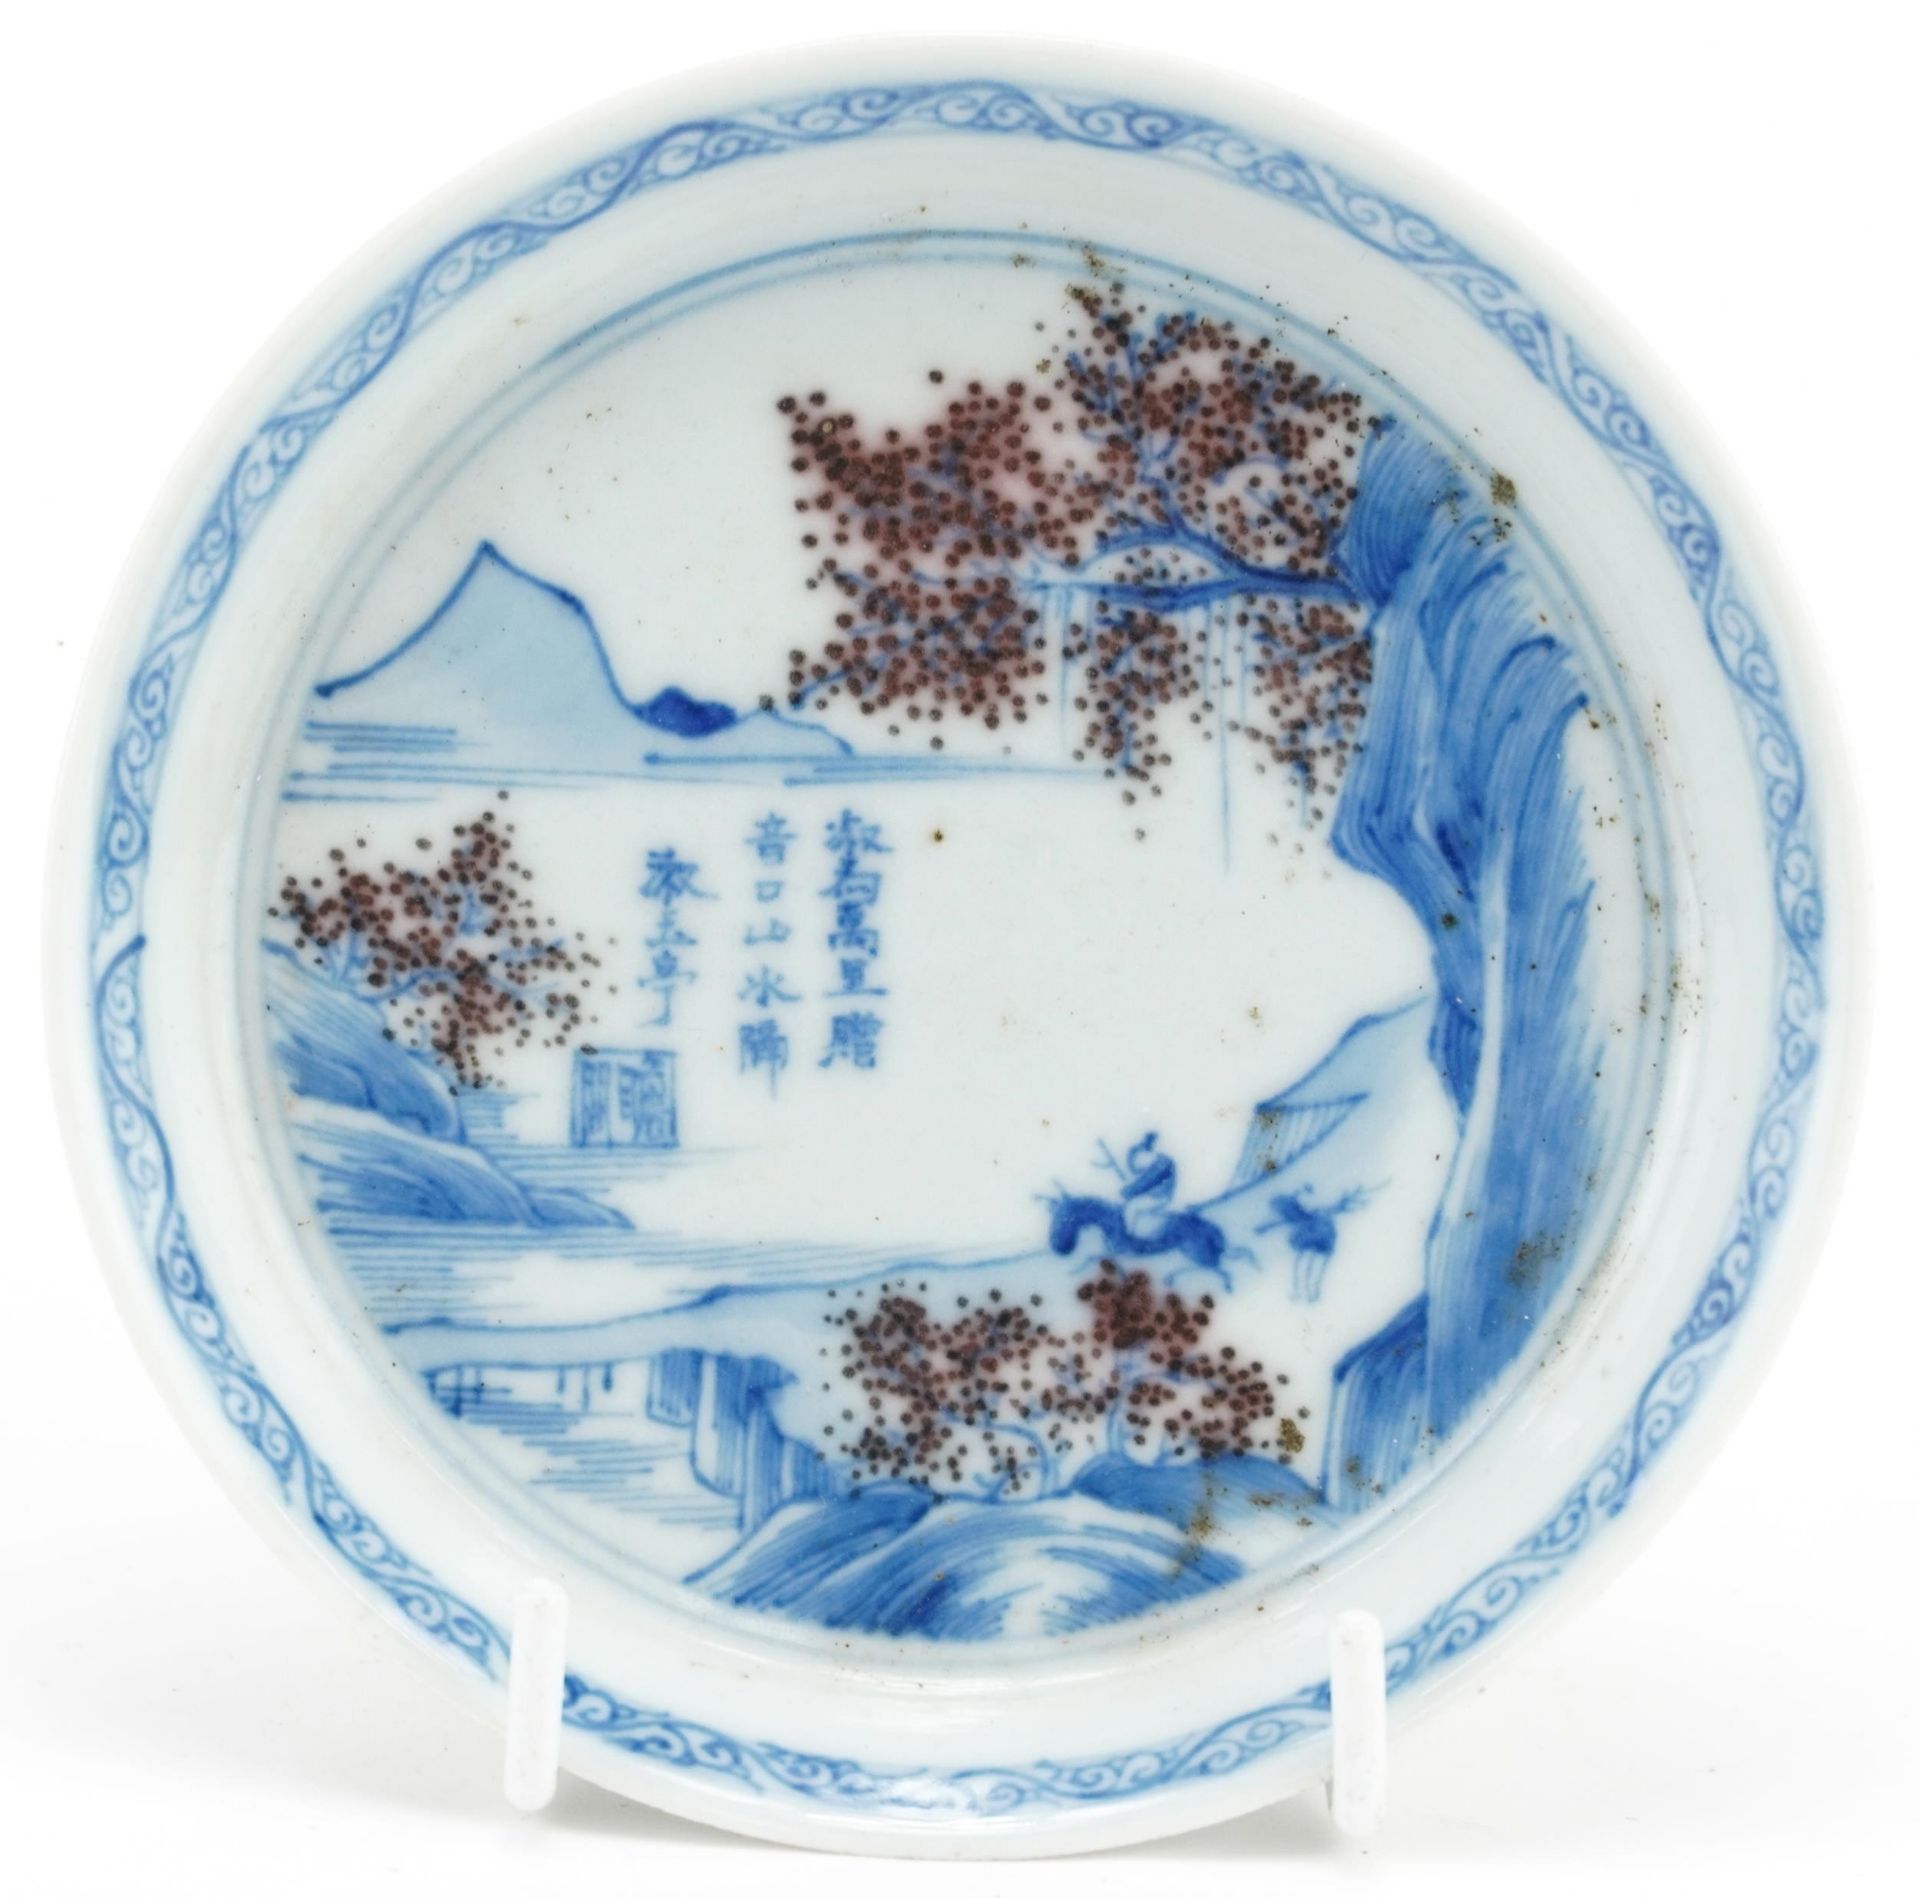 Chinese blue and white with iron red porcelain dish hand painted with a figure on horseback before a - Image 2 of 4